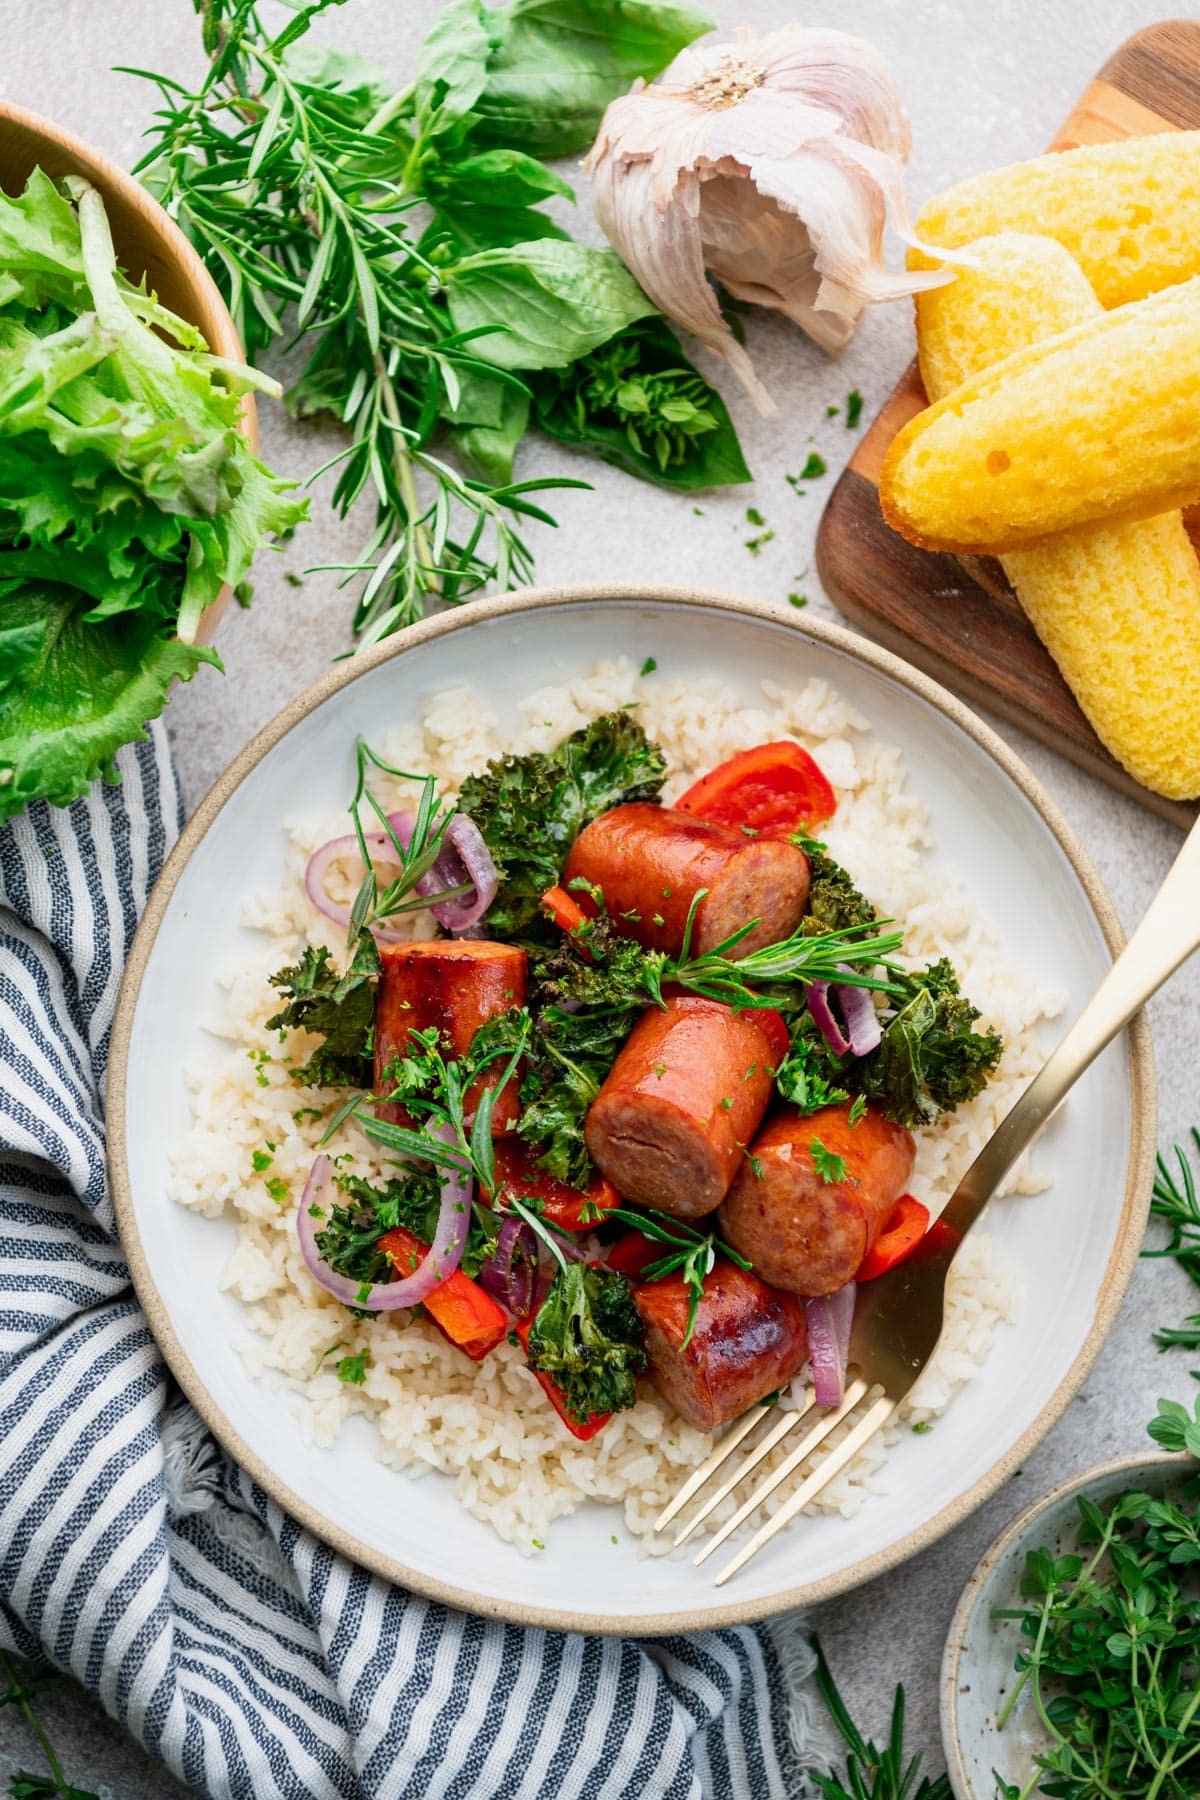 Andouille sausage recipe with peppers, onions, and greens in a bowl with a side of rice.